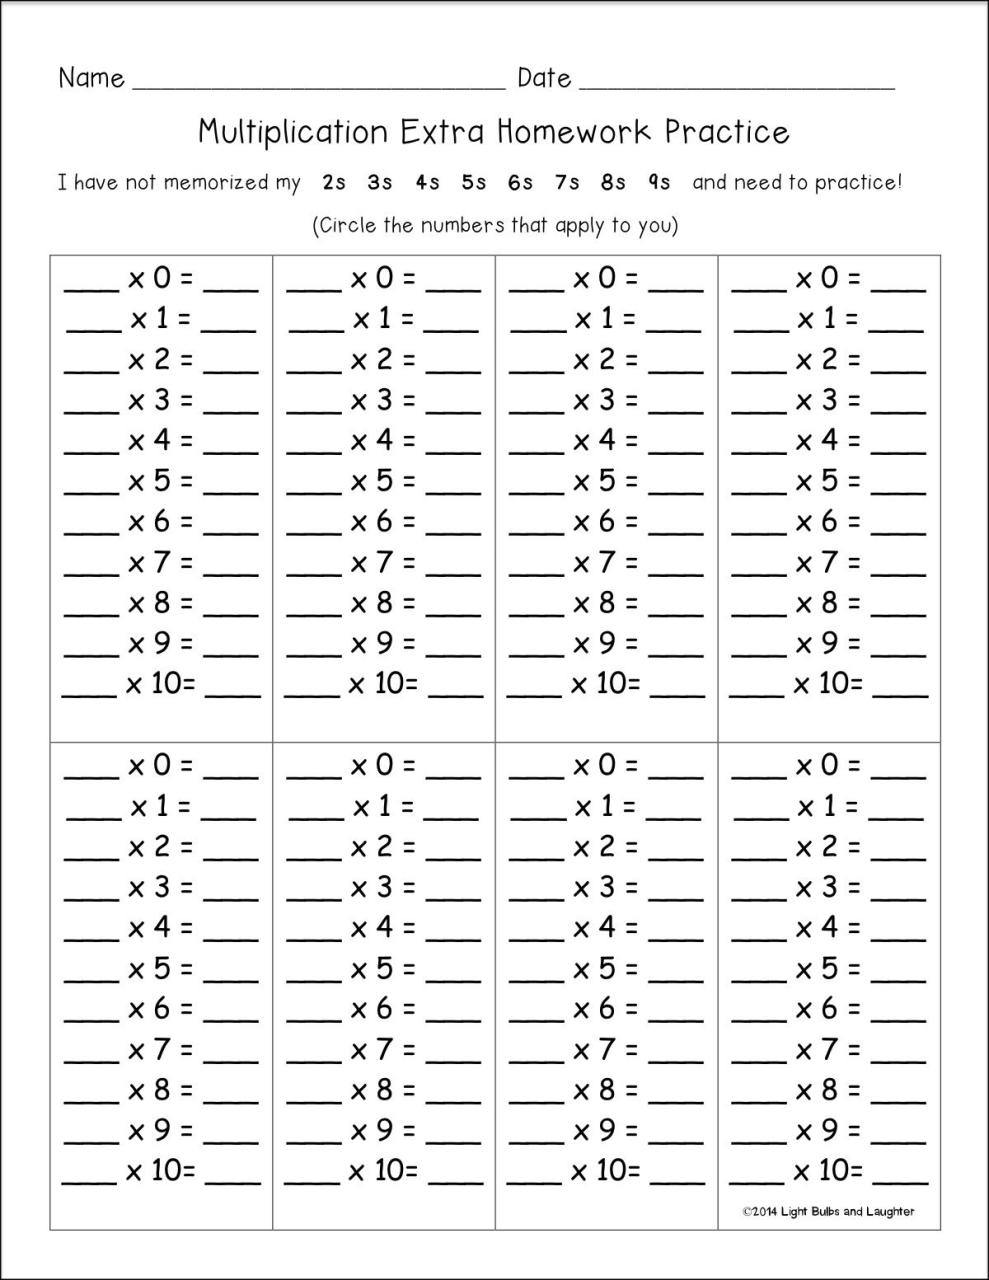 Worksheet For Class 1 Evs